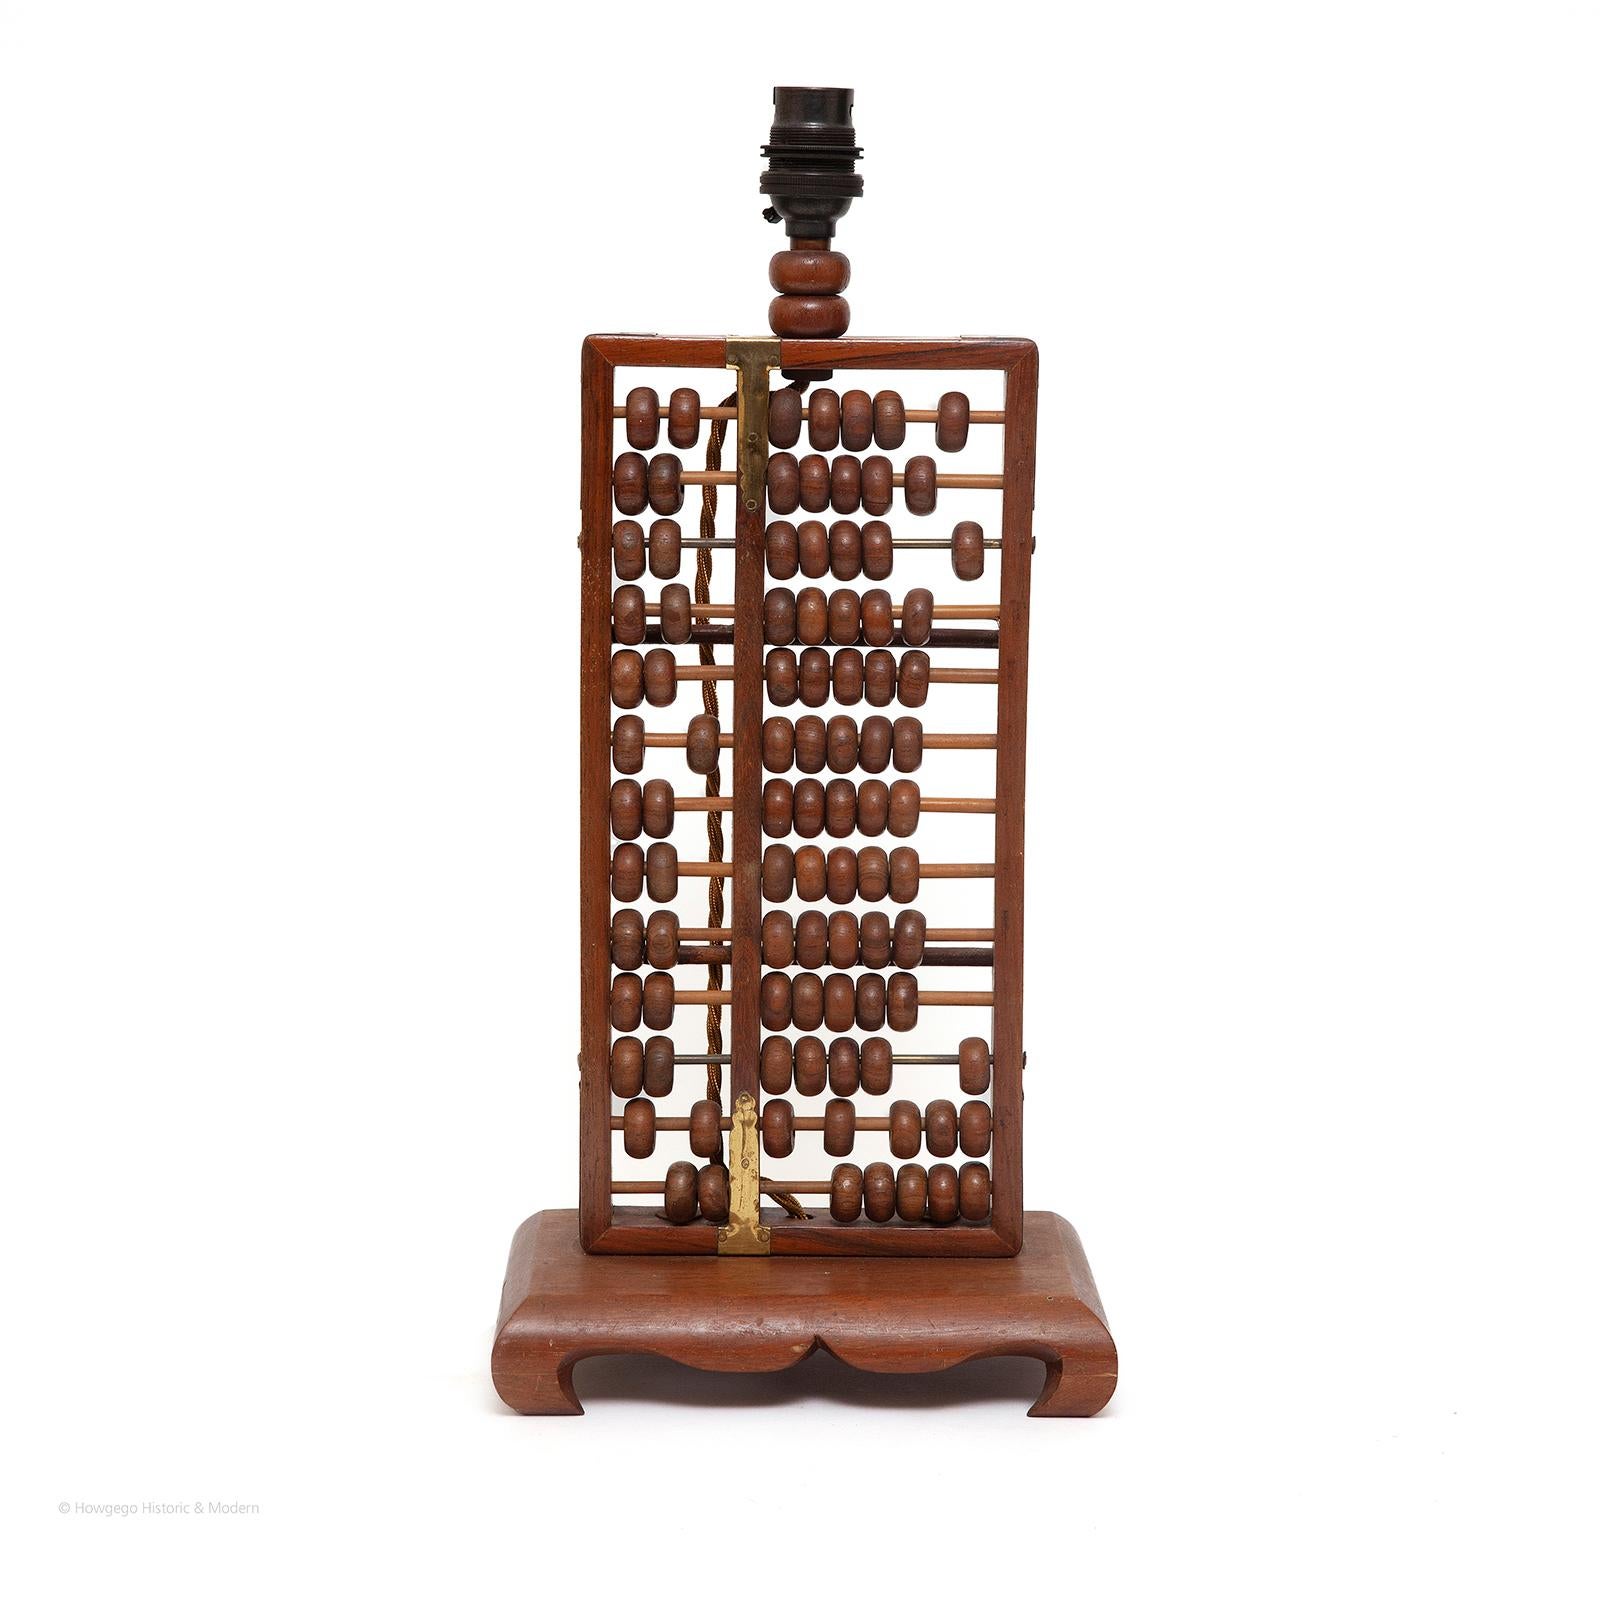 CHINESE, HARDWOOD, ABACUS OR SUANPAN WITH 13 RODS, TWO HEAVEN BEADS & FIVE EARTH BEADS UPCYCLED INTO A TABLE LAMP, 16½“ HIGH

Fun and engaging, interactive table lamp that can also be used as calculating tool
As well as providing light, this table